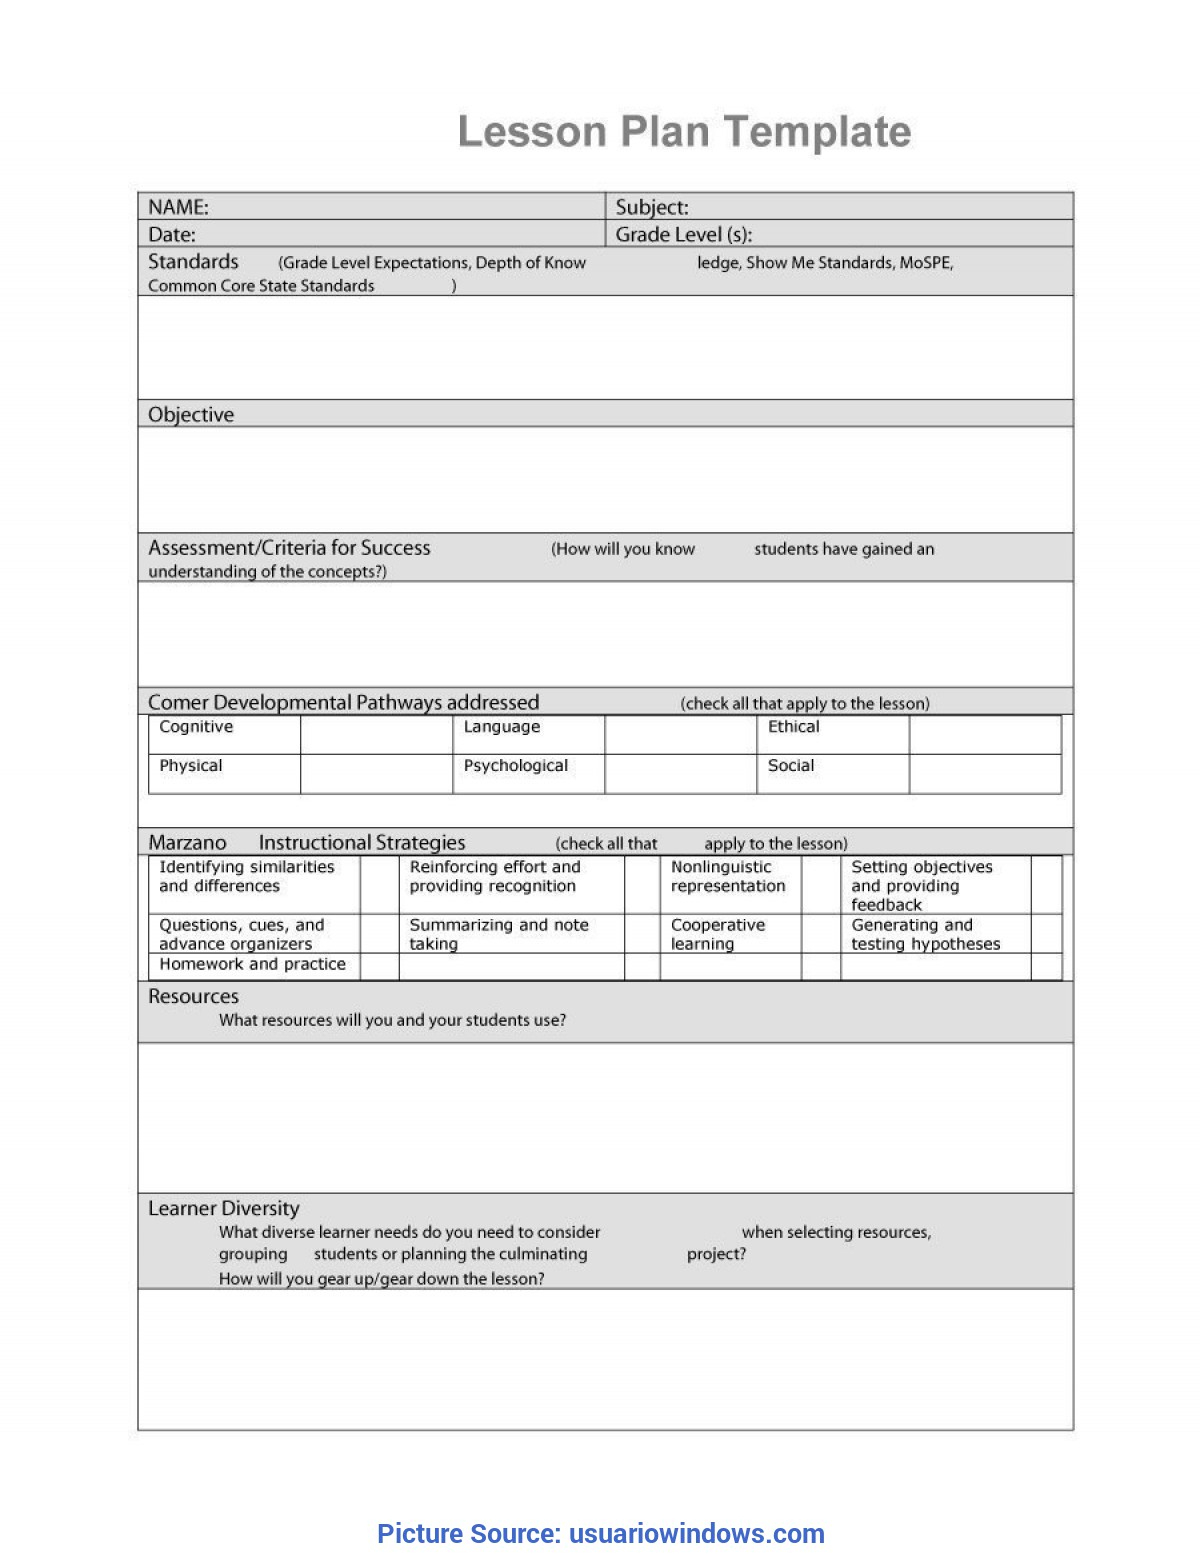 Marzano Lesson Plan Template Free Lesson Plans Learning